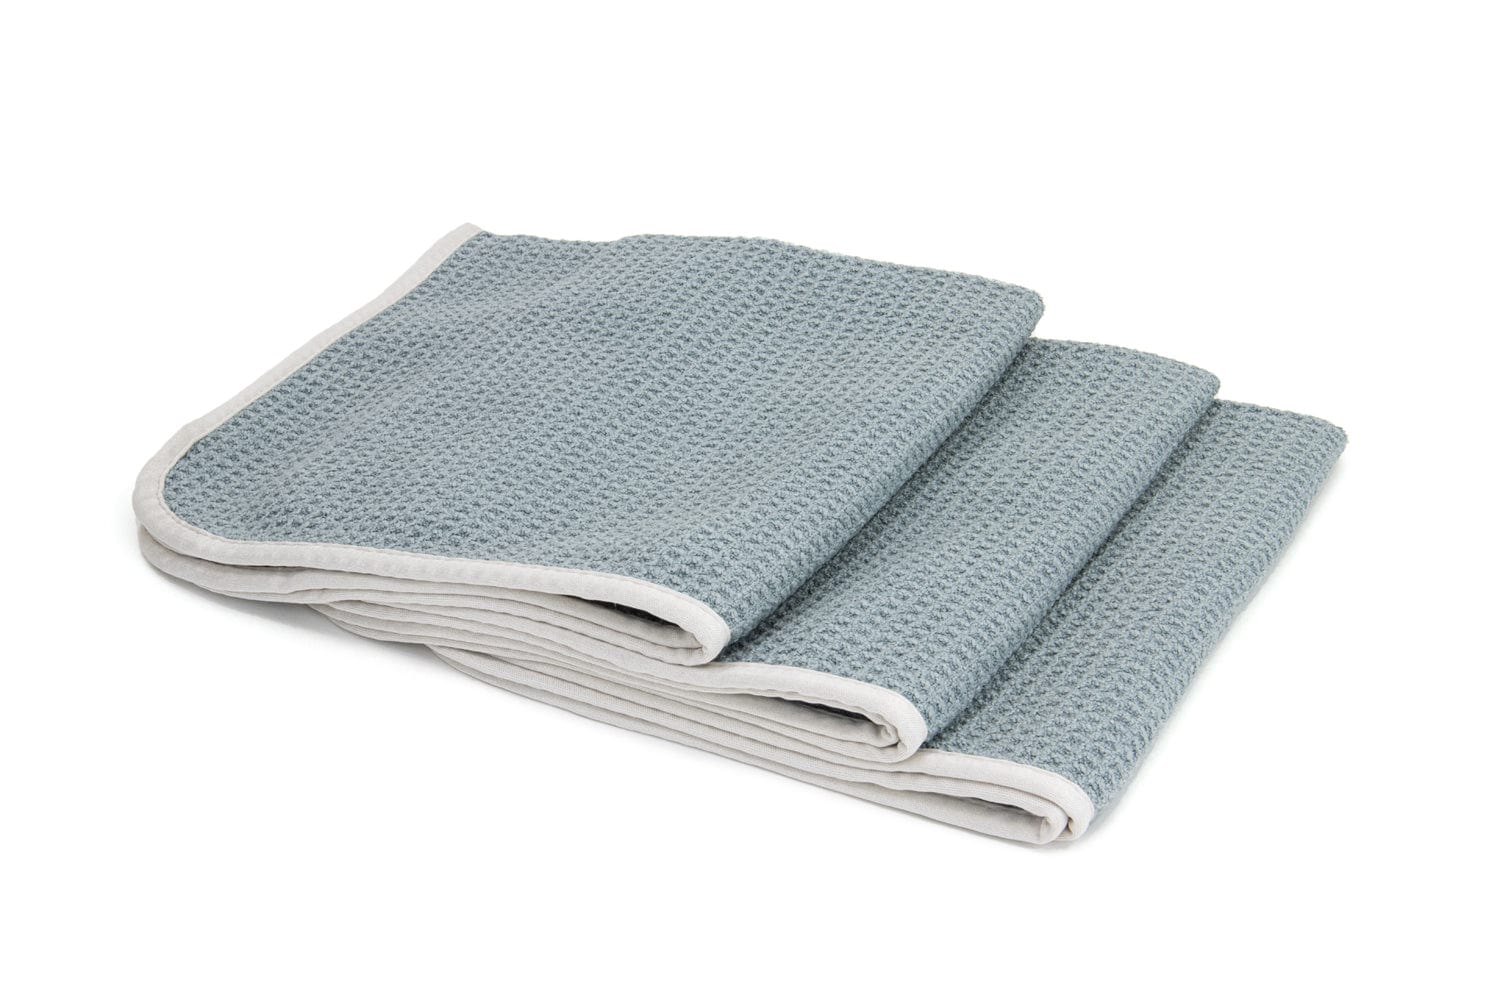 ULTRA TERRY MICROFIBER TOWEL 400 GSM 16 X 16 GRAY WITH RED STITCH